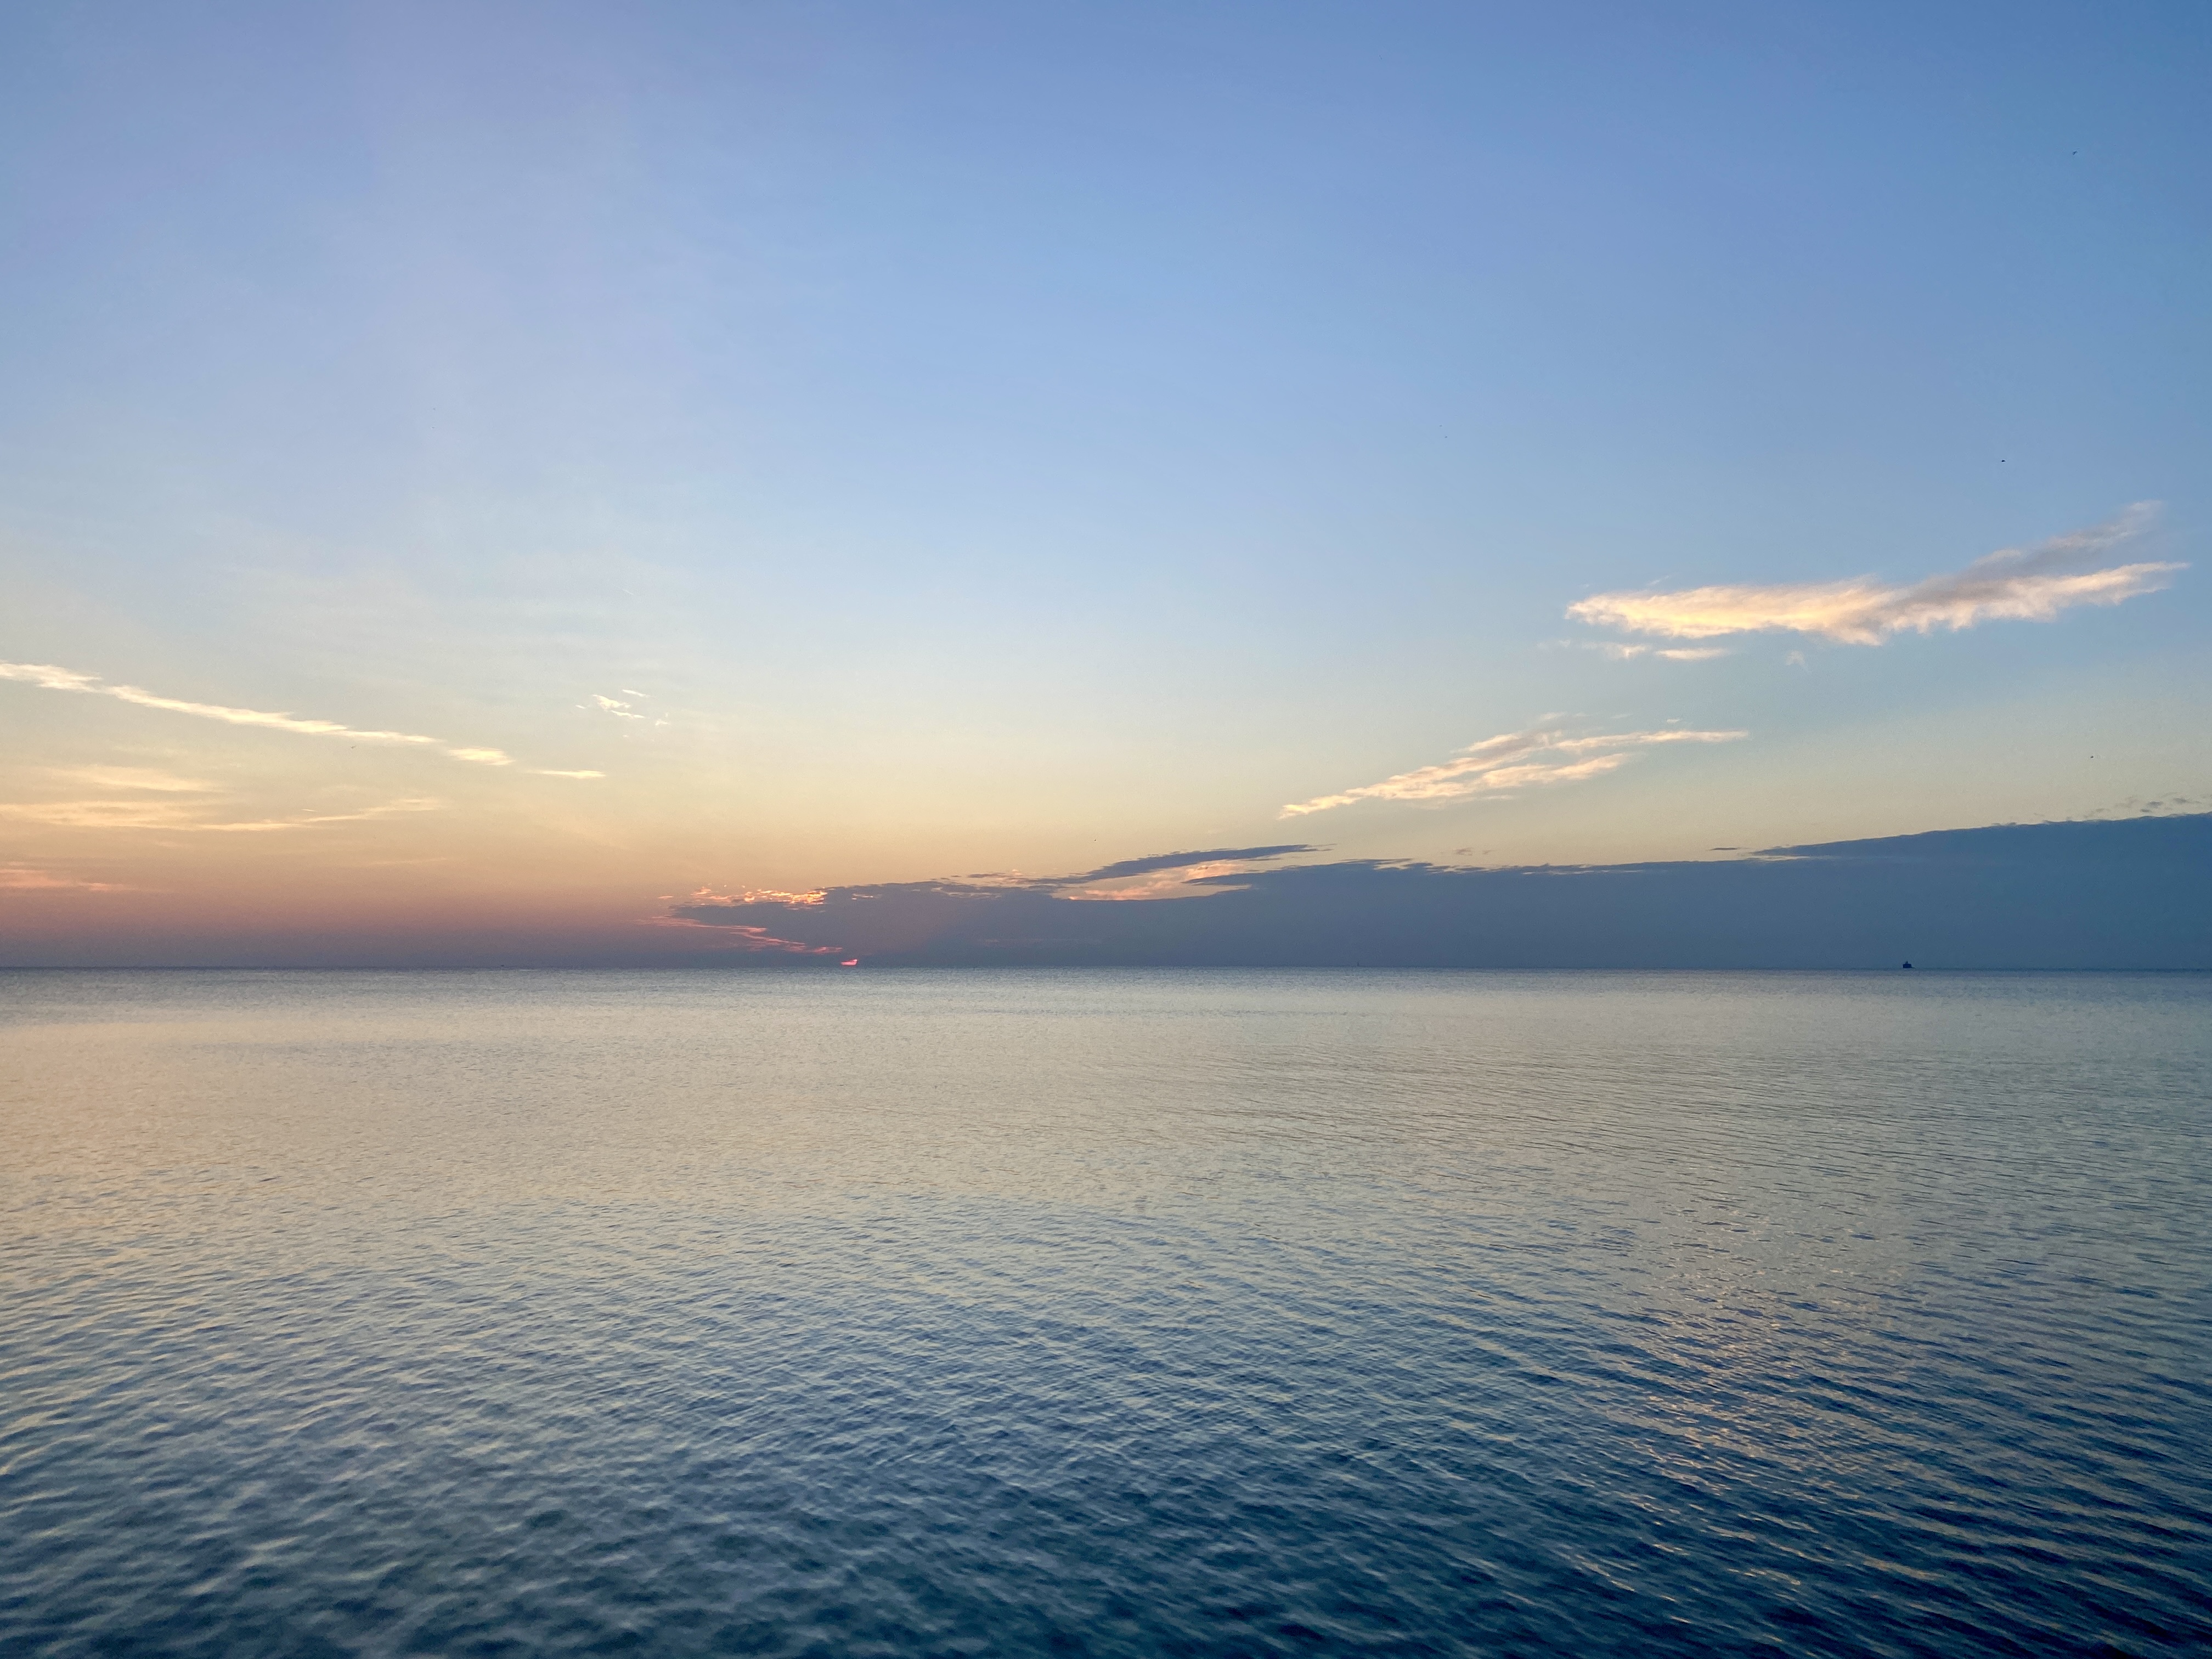 A wide lake horizon with a sweep of dark blue clouds along the water's edge, the lake surface calm and pale blue